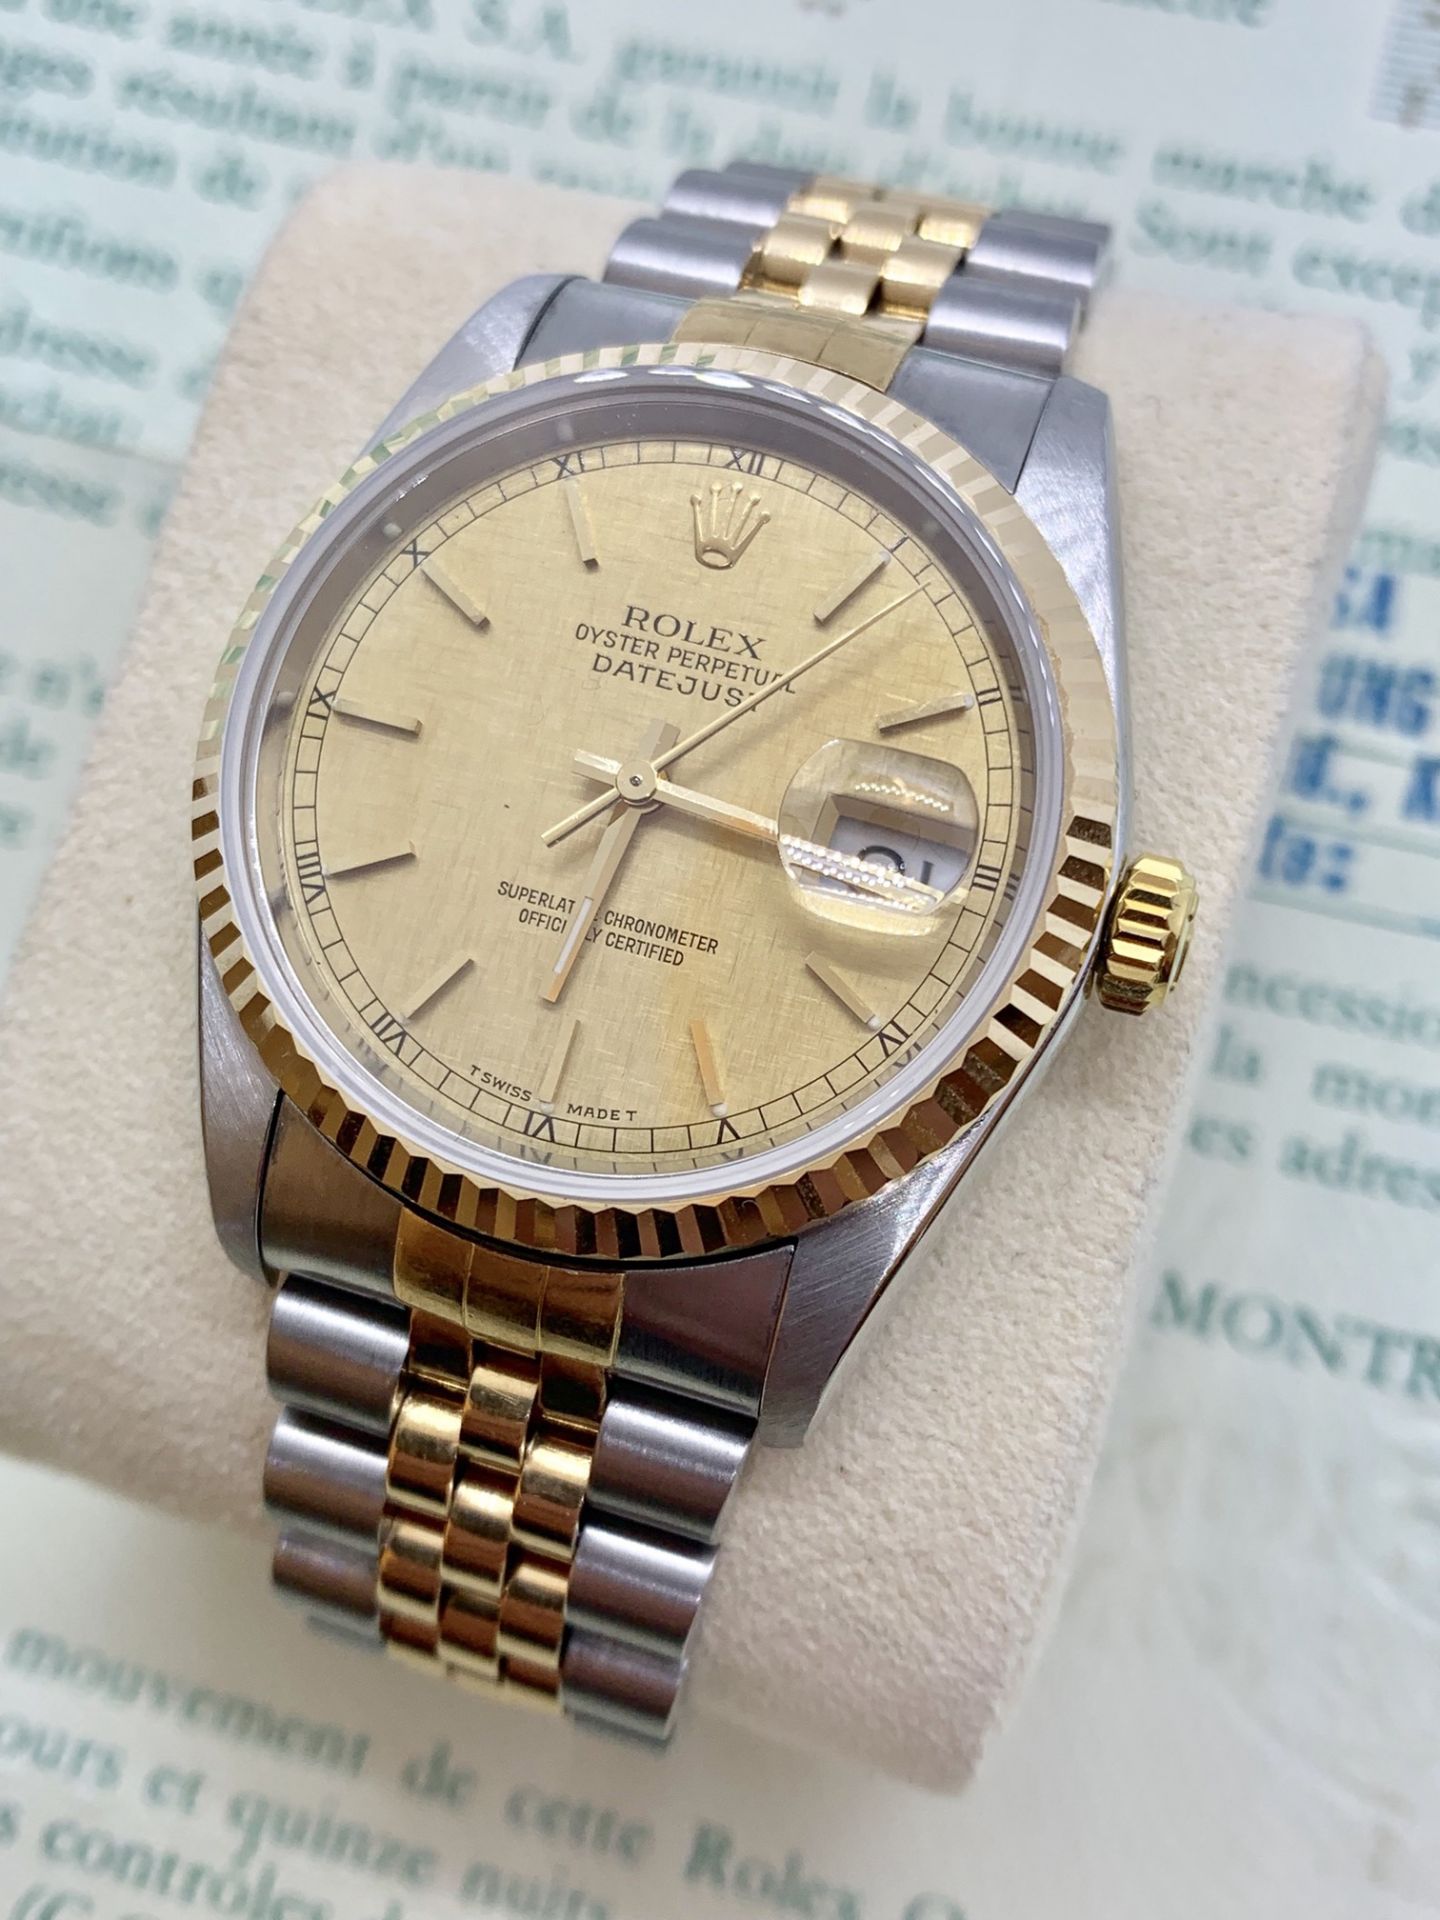 ROLEX S/S & GOLD GENTS WATCH WITH ROLEX CERTIFICATE